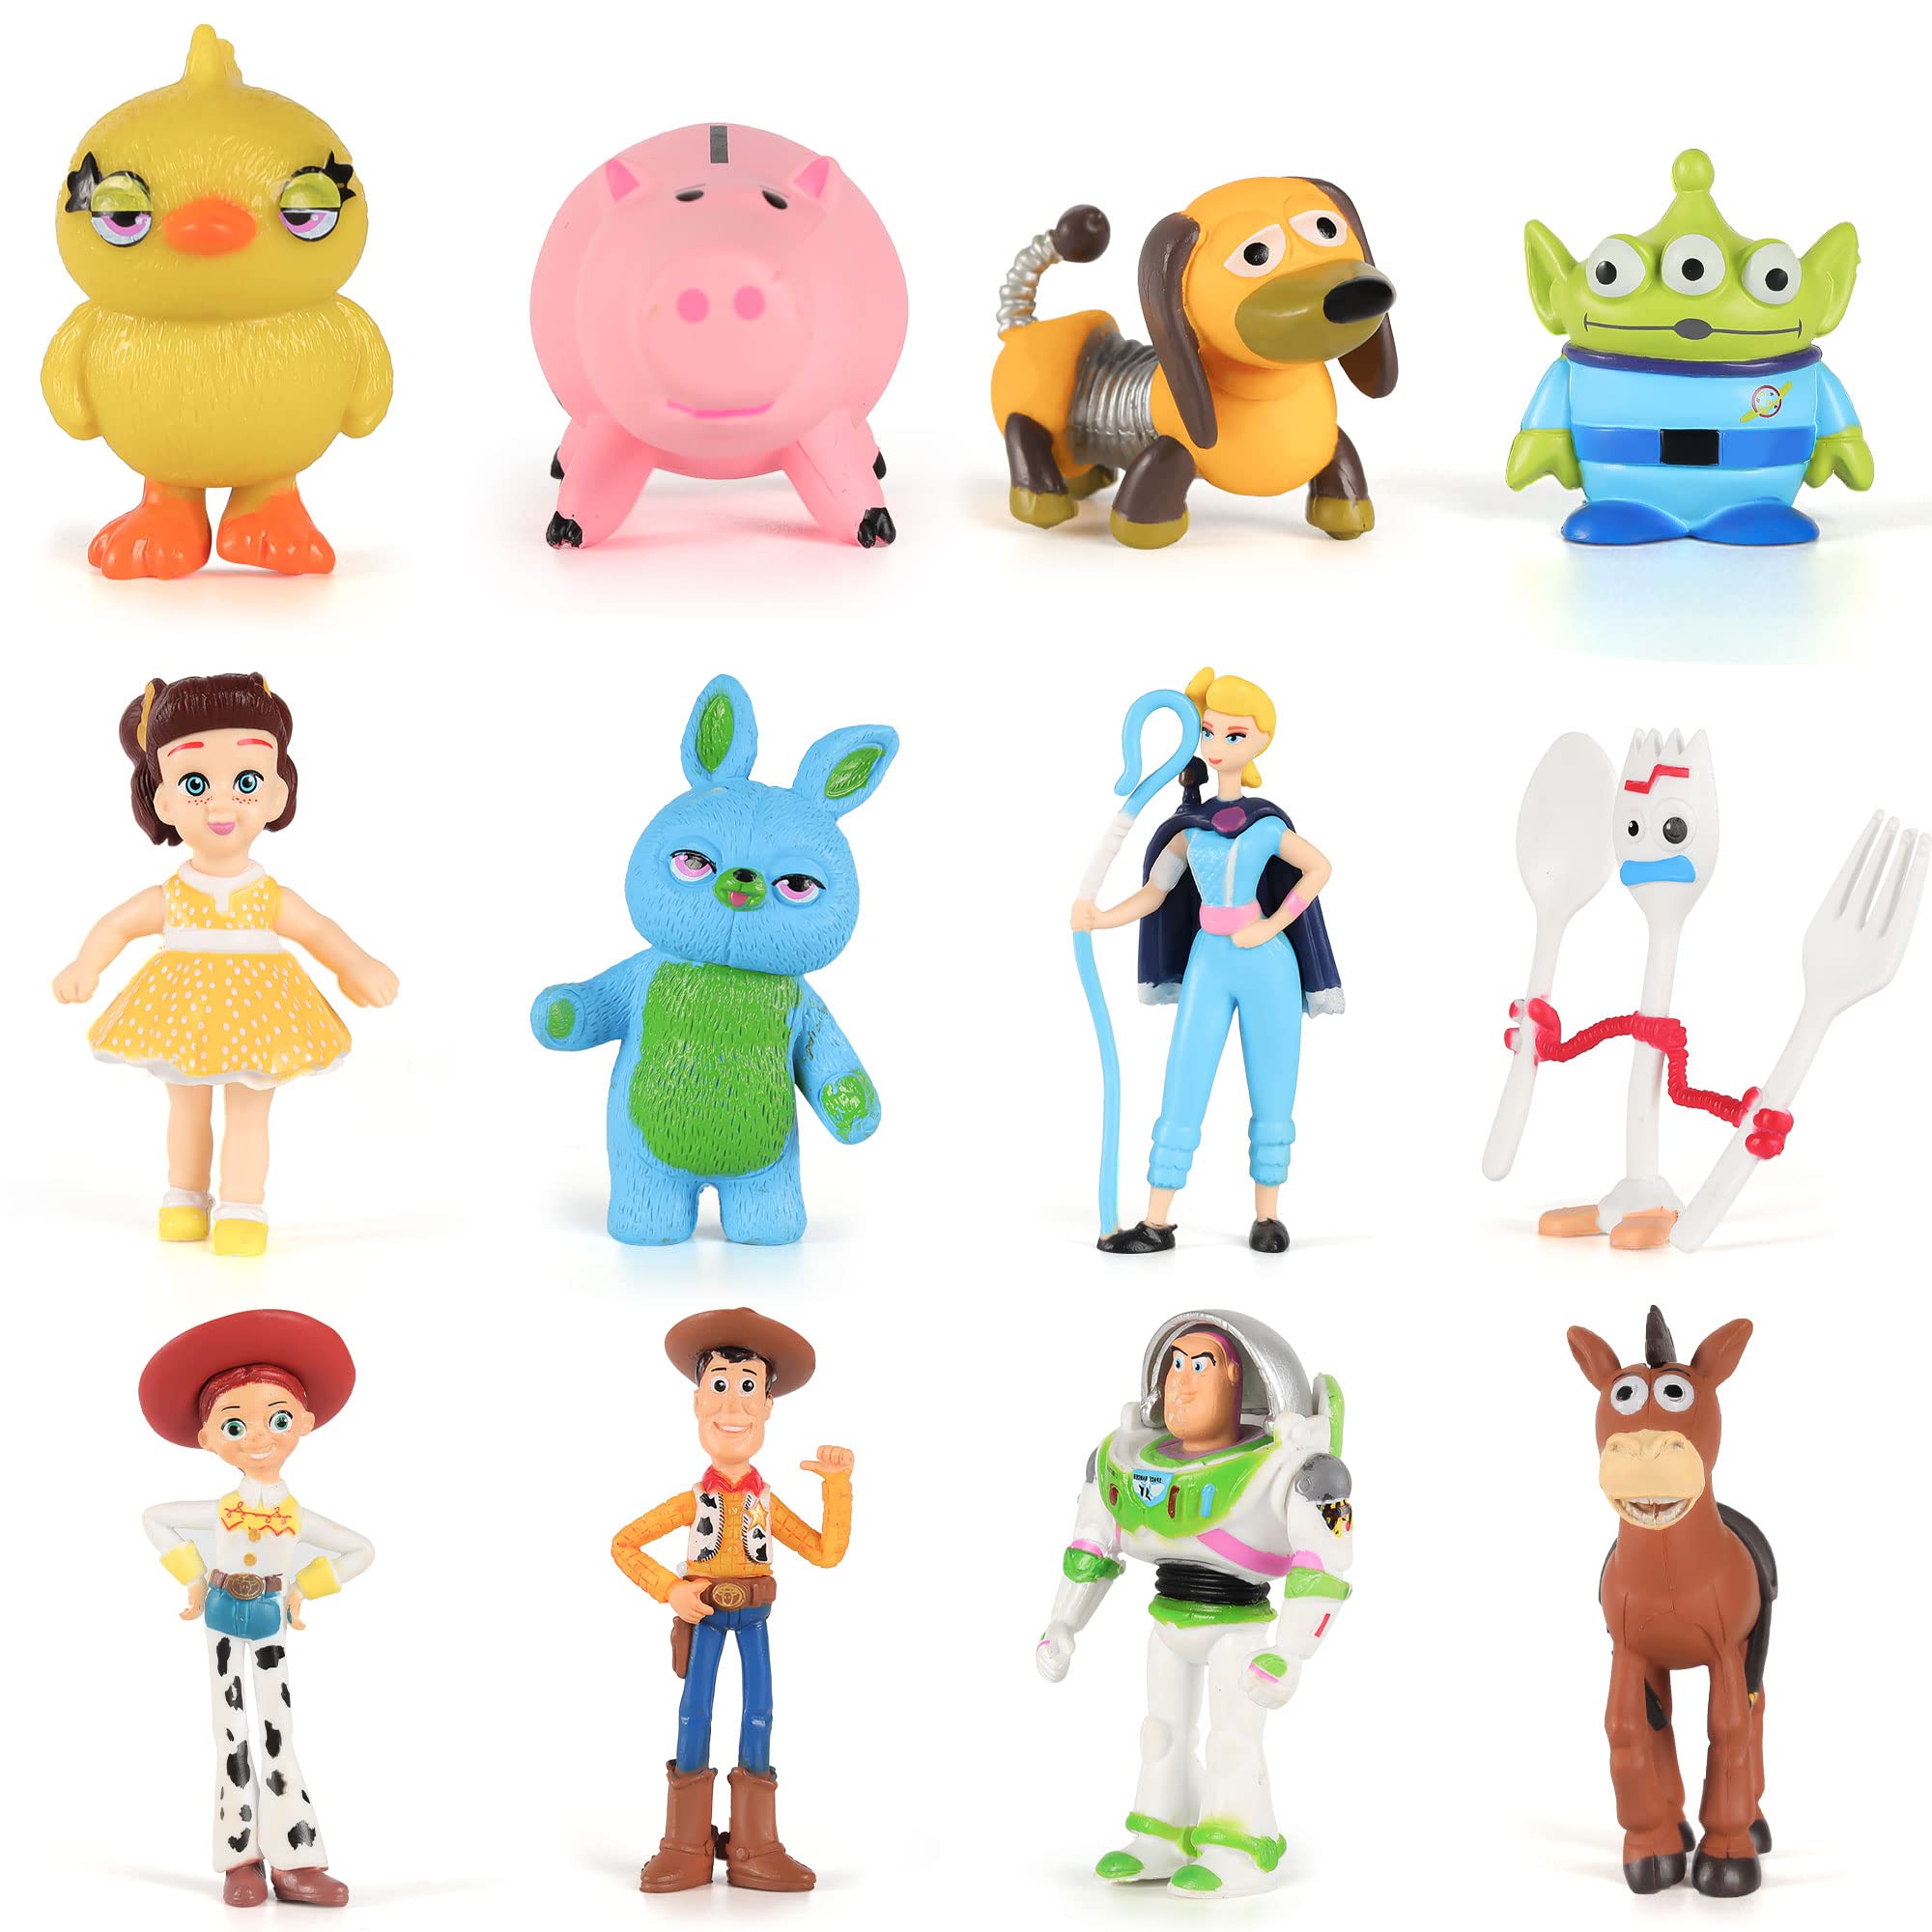 12 PCS Story Cake Toppers Figurines, Mini Figures Set Cute Action Figures Cupcake Toppers Cartoon Action Figures Birthday Party Cake Decorations (A)